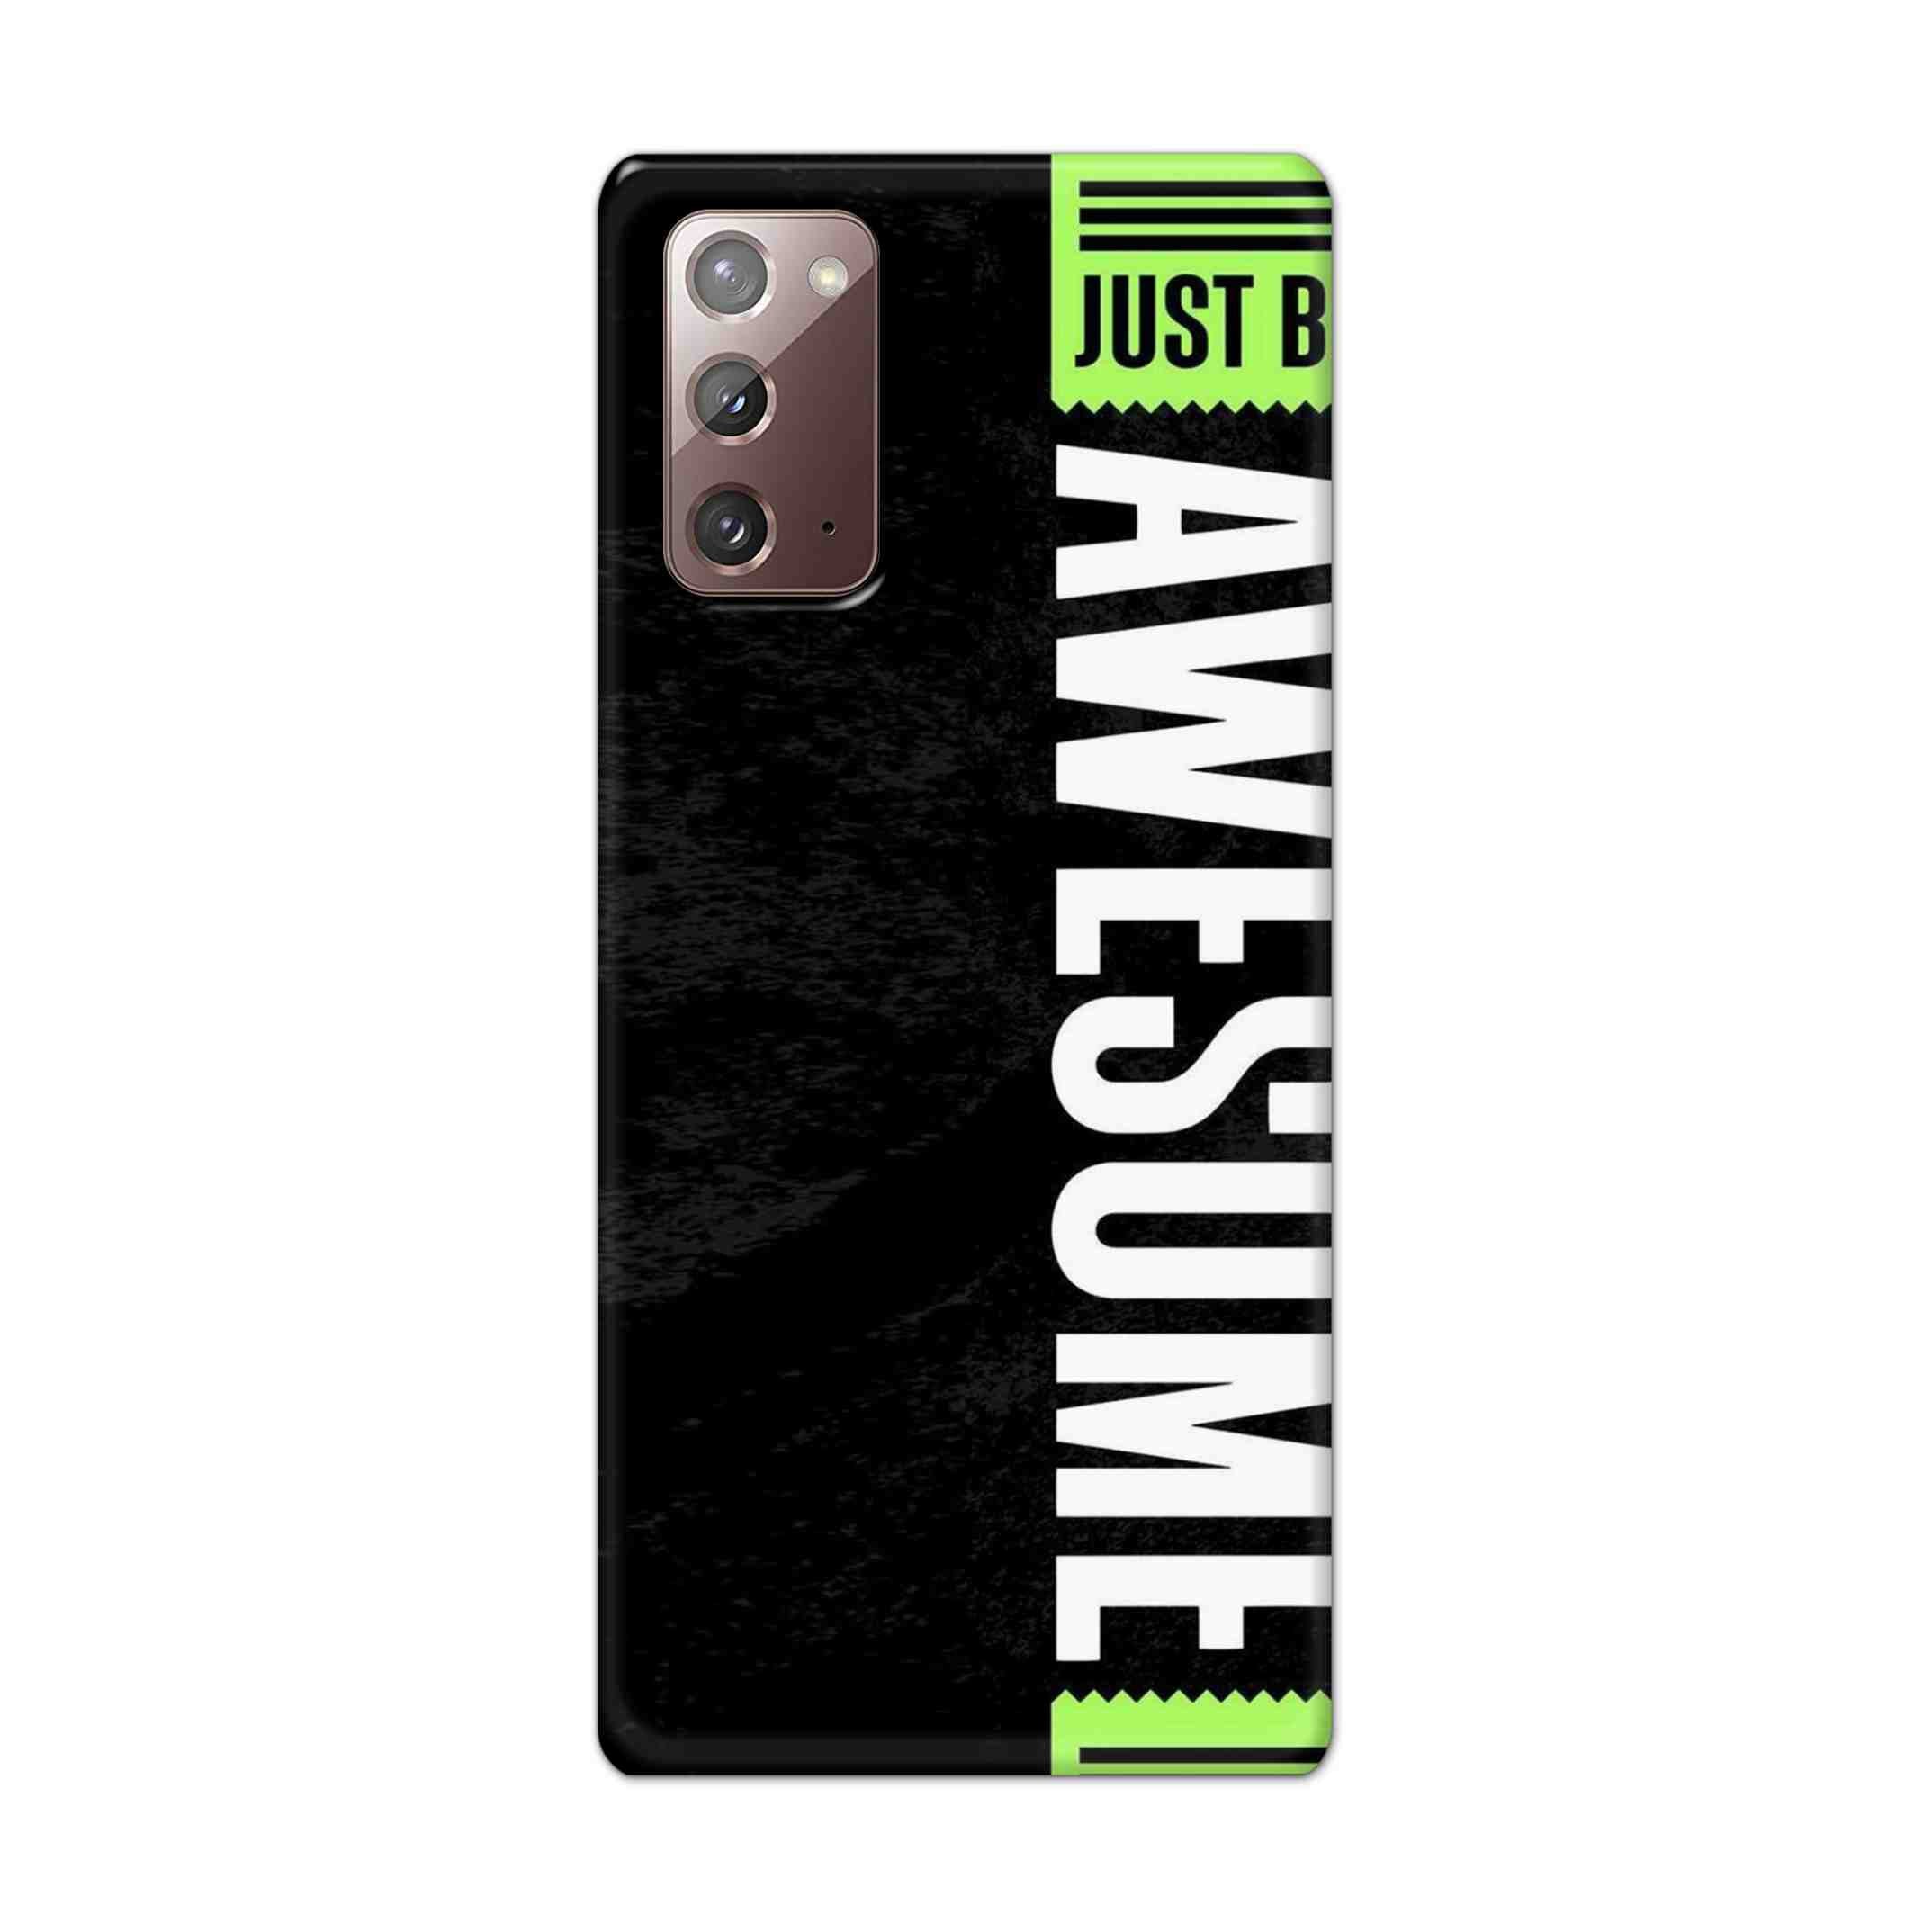 Buy Awesome Street Hard Back Mobile Phone Case Cover For Samsung Galaxy Note 20 Online